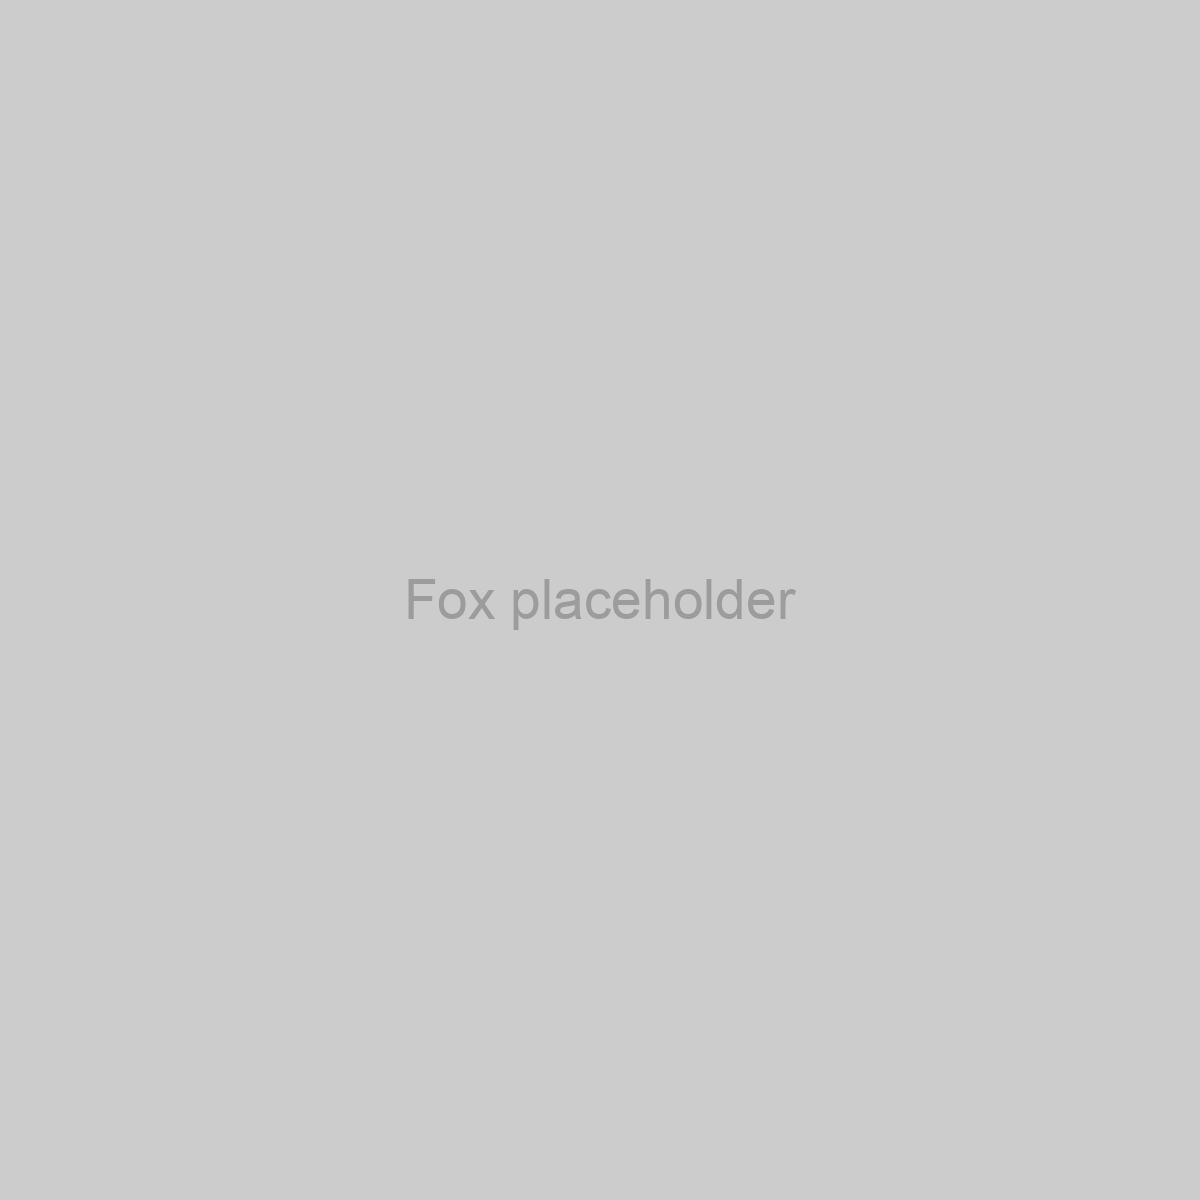 Fox Placeholder Image